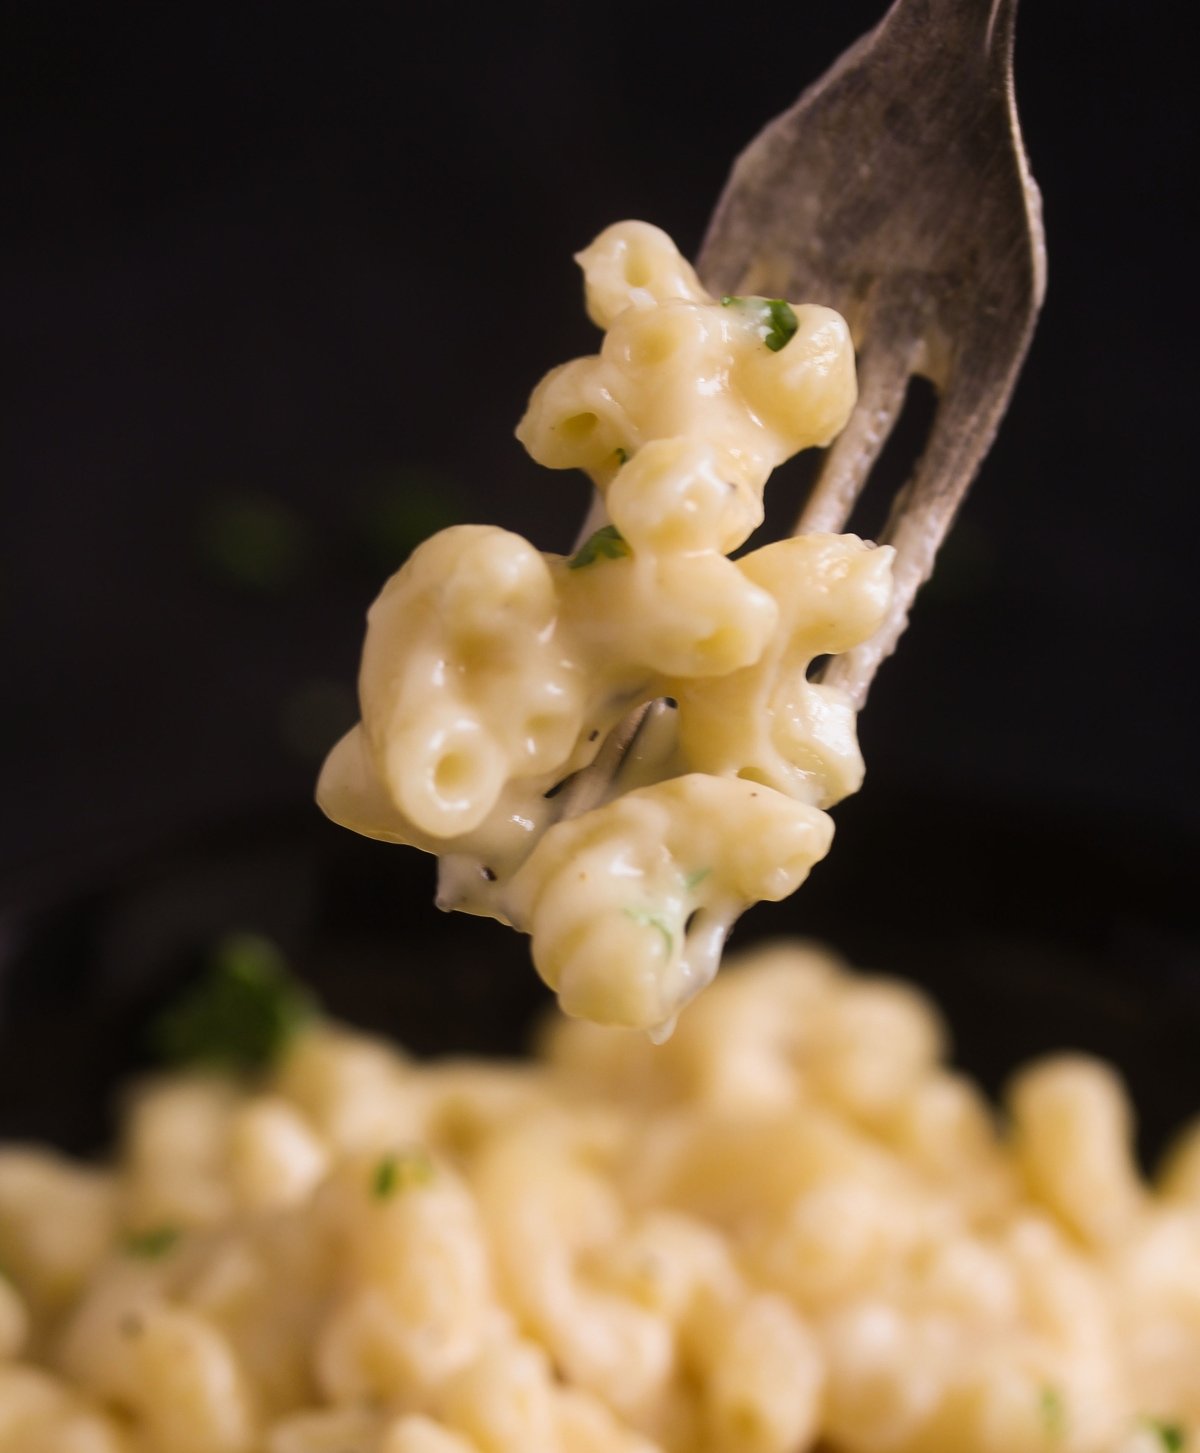 a fork lifting macaroni and cheese on a black background.